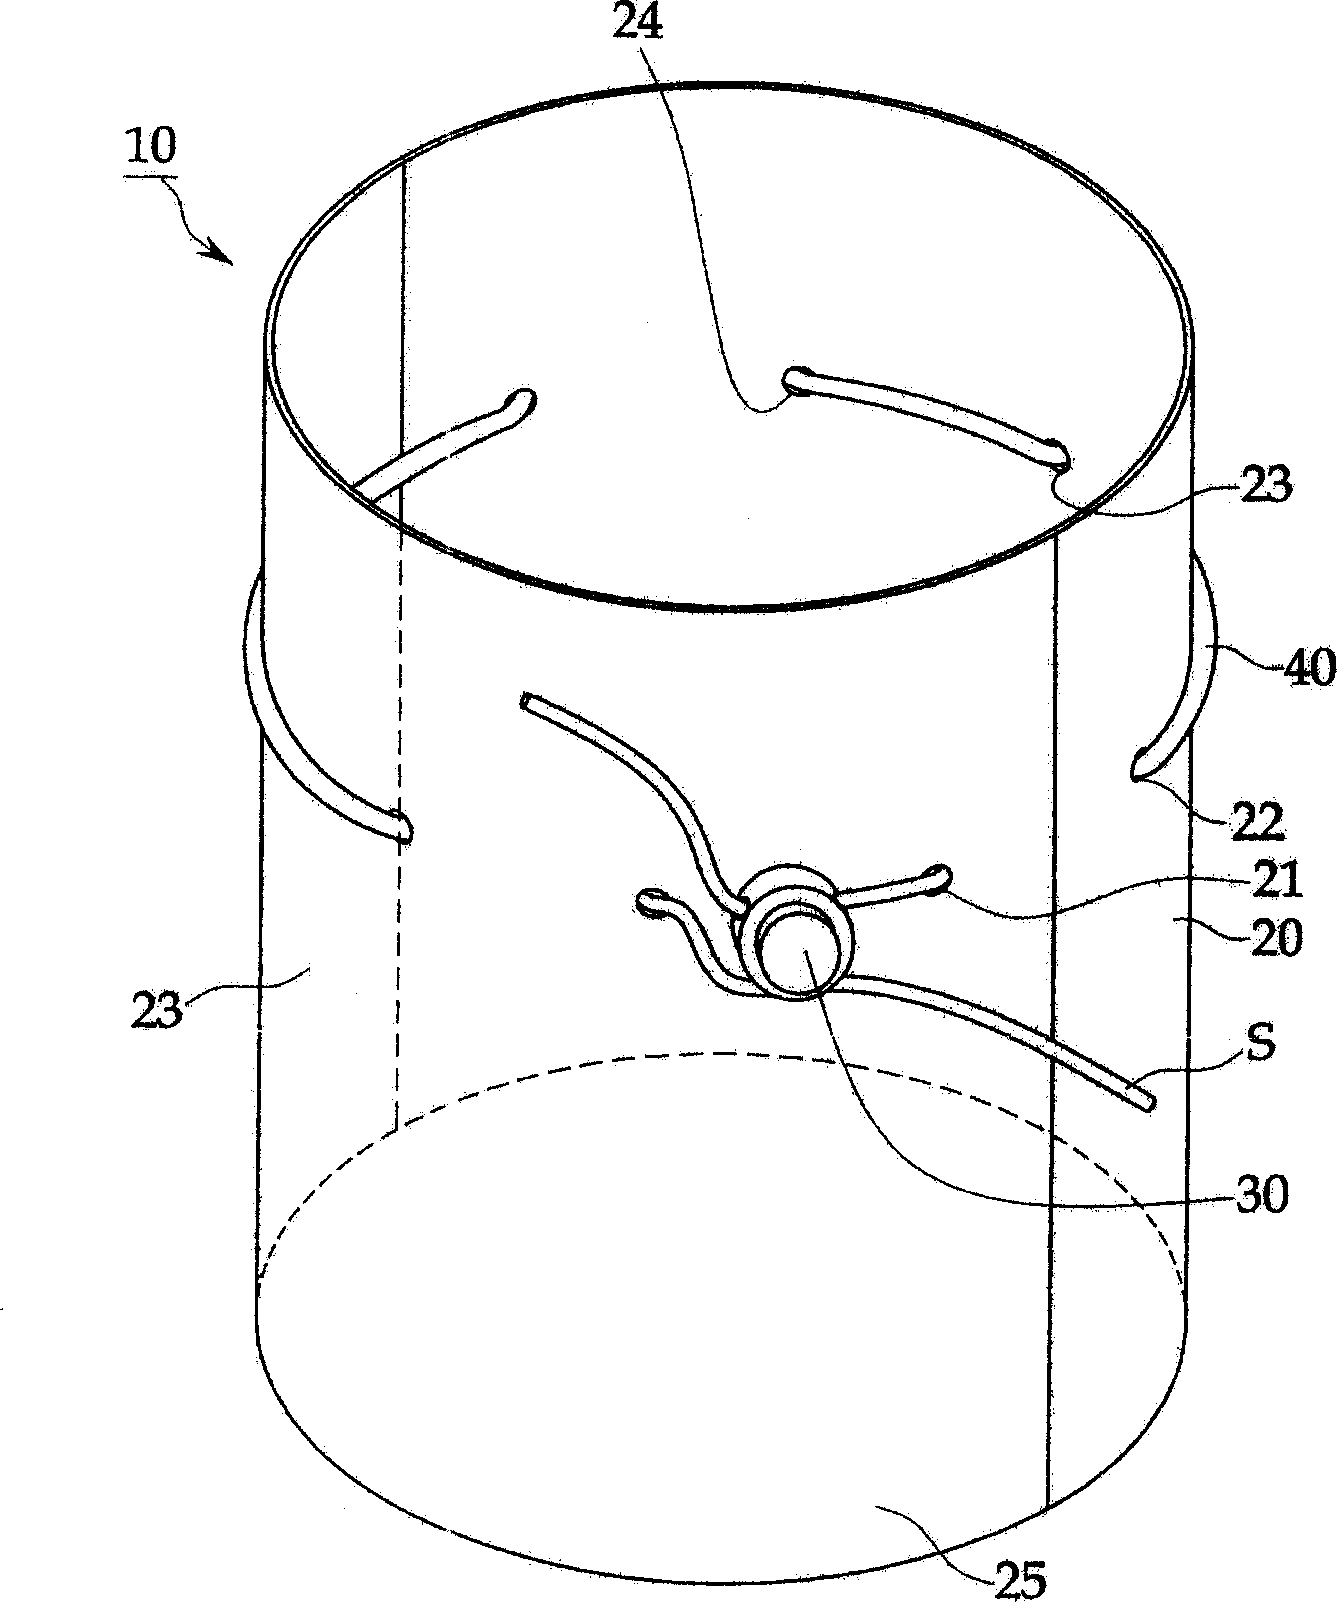 Supporting apparatus for flower arrangement